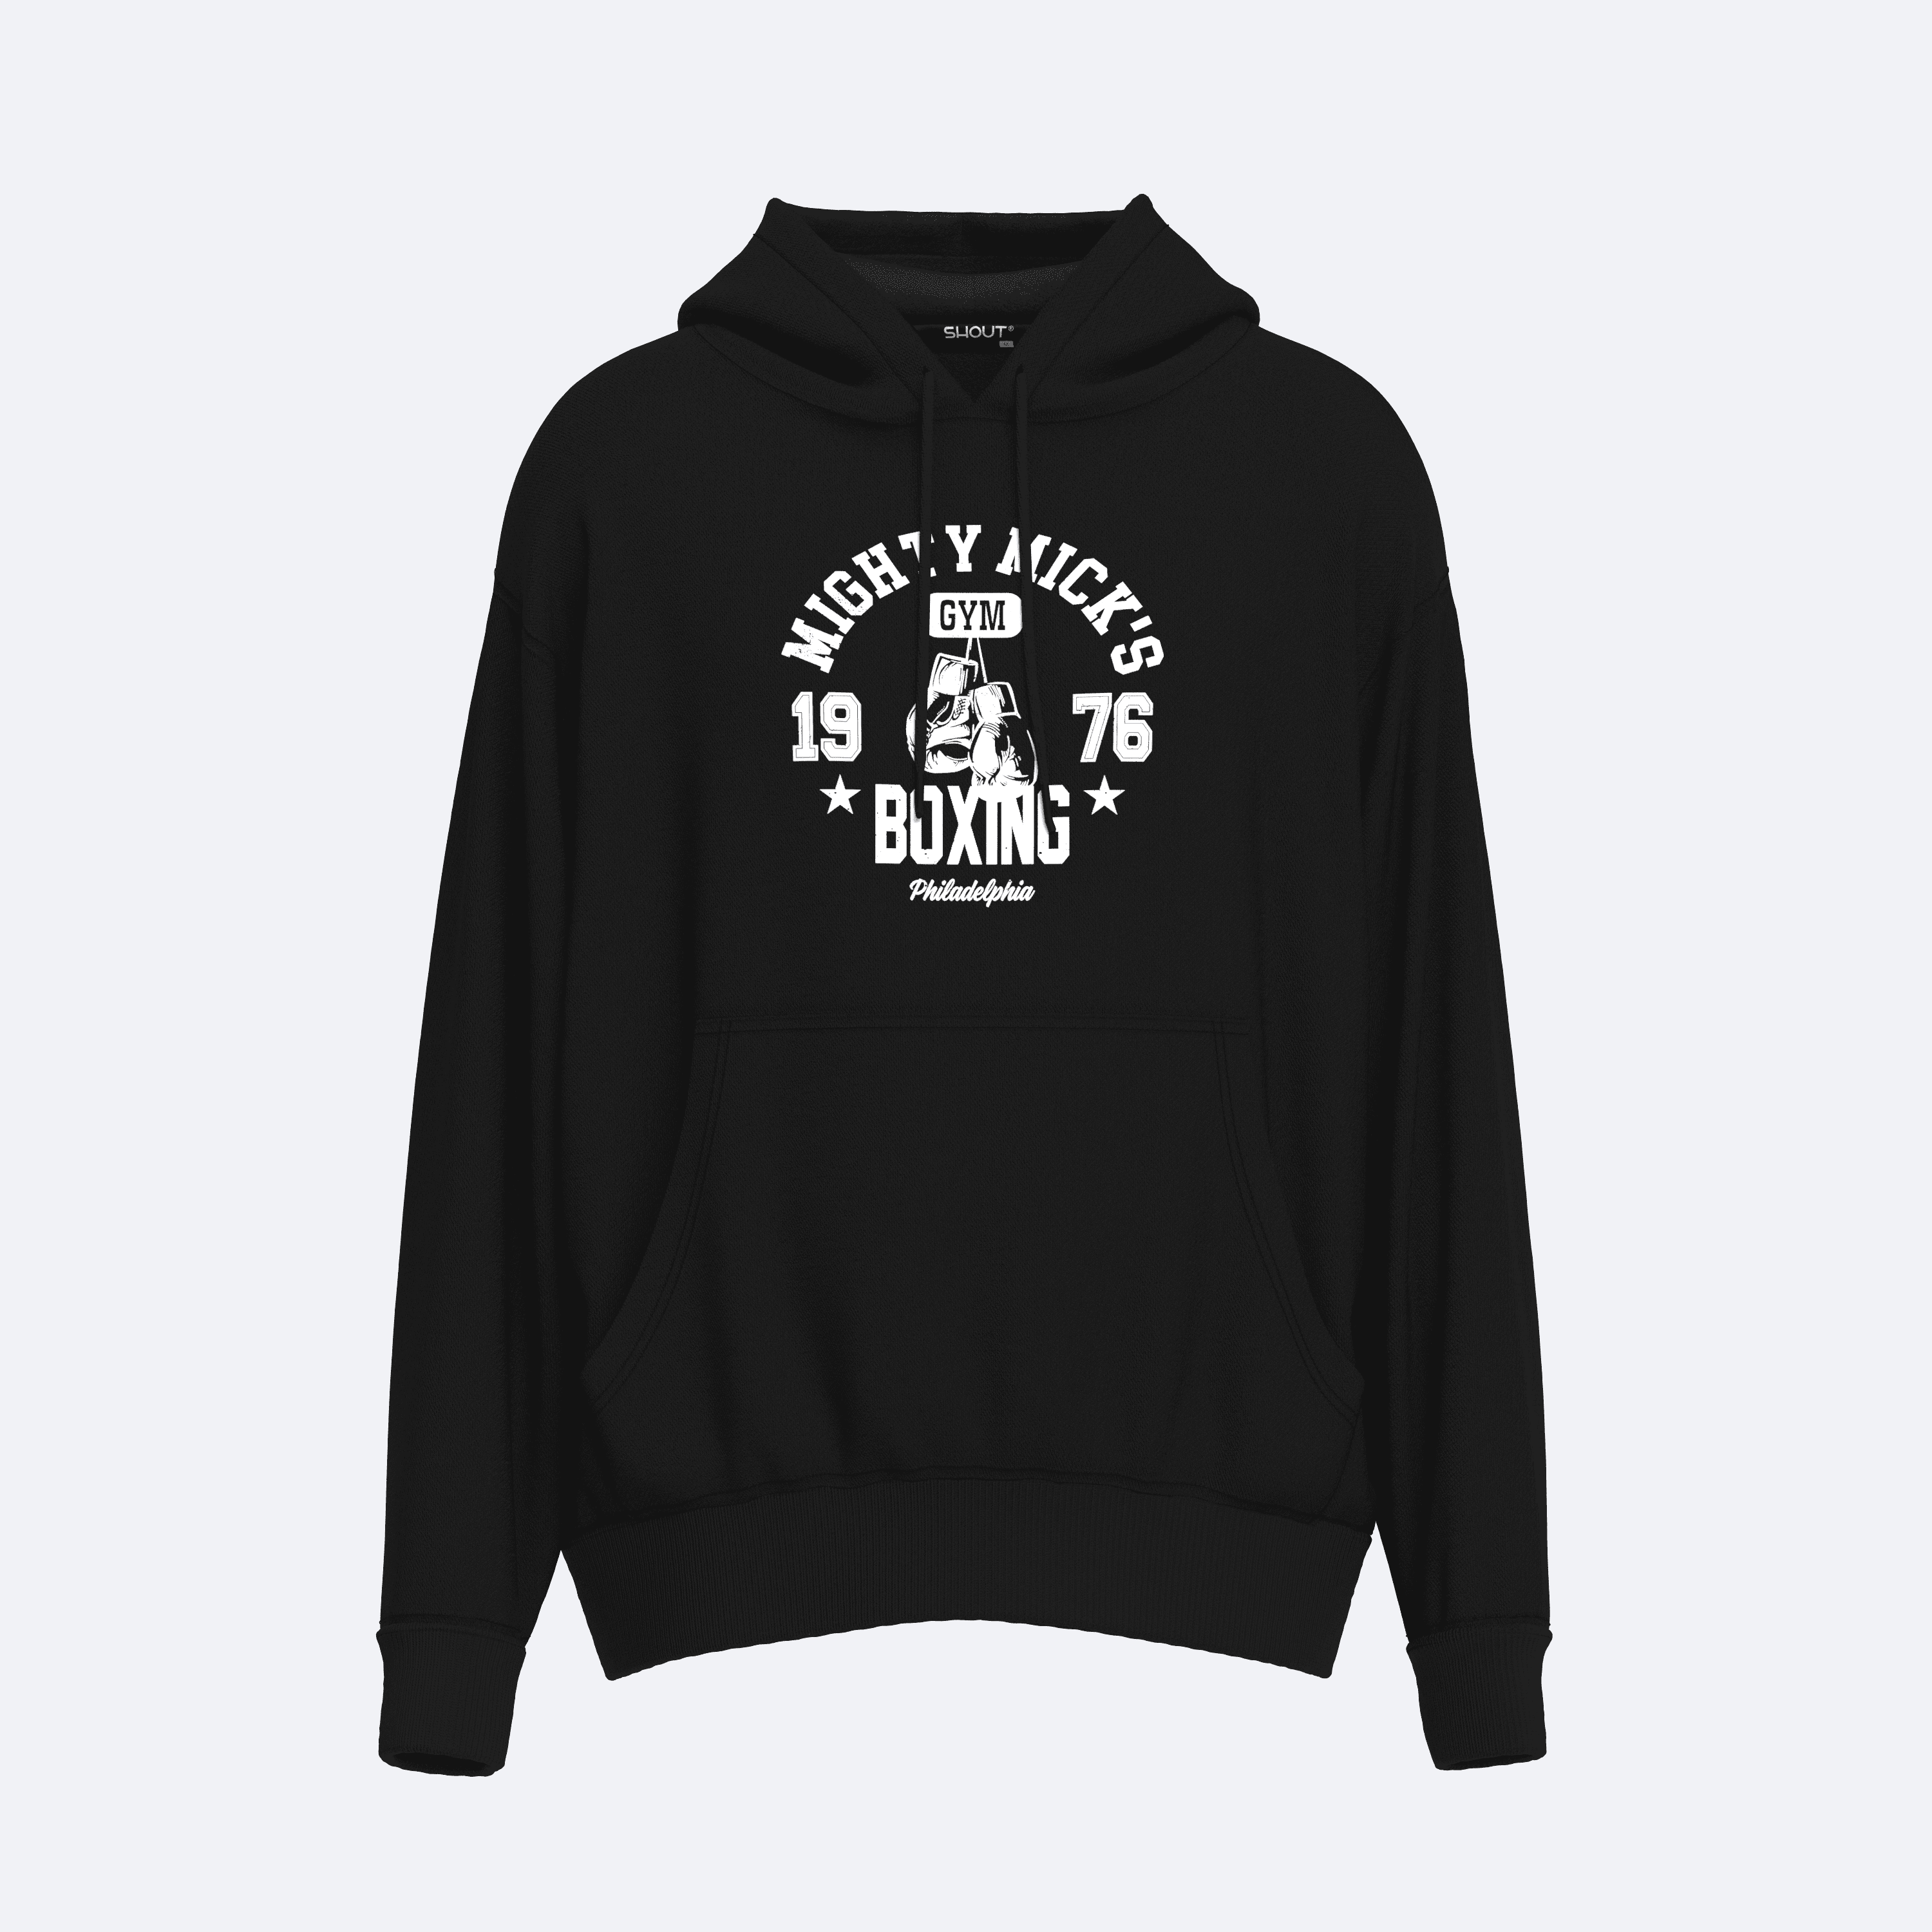 Shout Oversize Mighty Mick's 1976 Boxing Unisex Hoodie